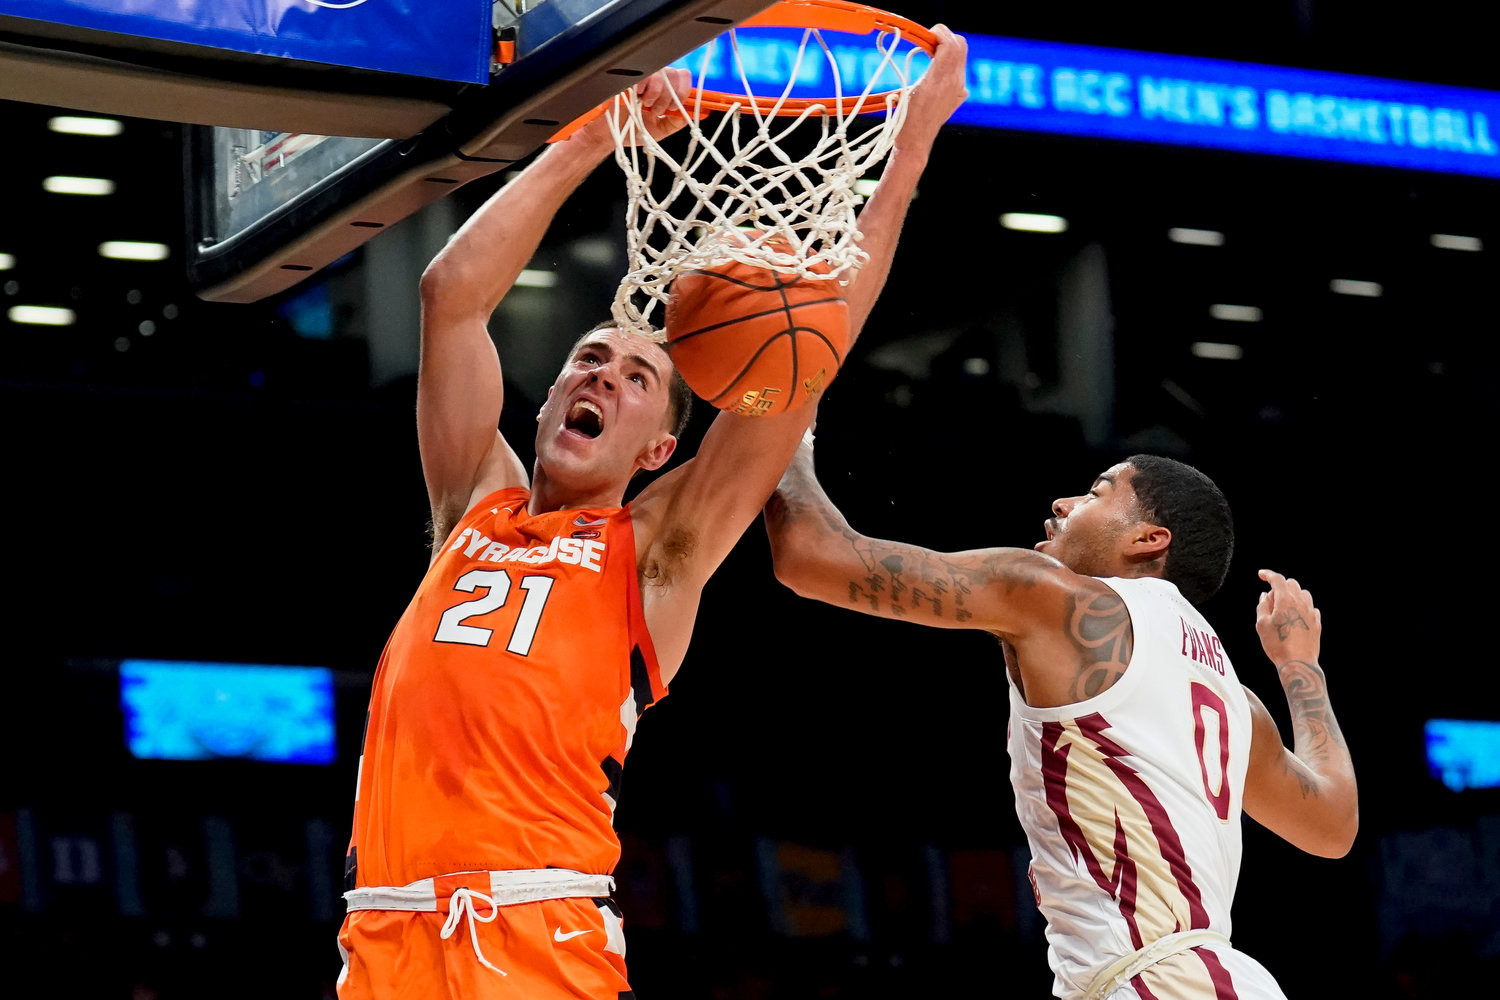 FORGOING FINAL YEAR OF ELIGIBILITY — Syracuse's Cole Swider (21) dunks against Florida State's RayQuan Evans (0) in the first half of an Atlantic Coast Conference men's basketball tournament game on March 9 in New York. Swider will forgo his final year of eligibility and declare for the NBA draft, he announced on social media.